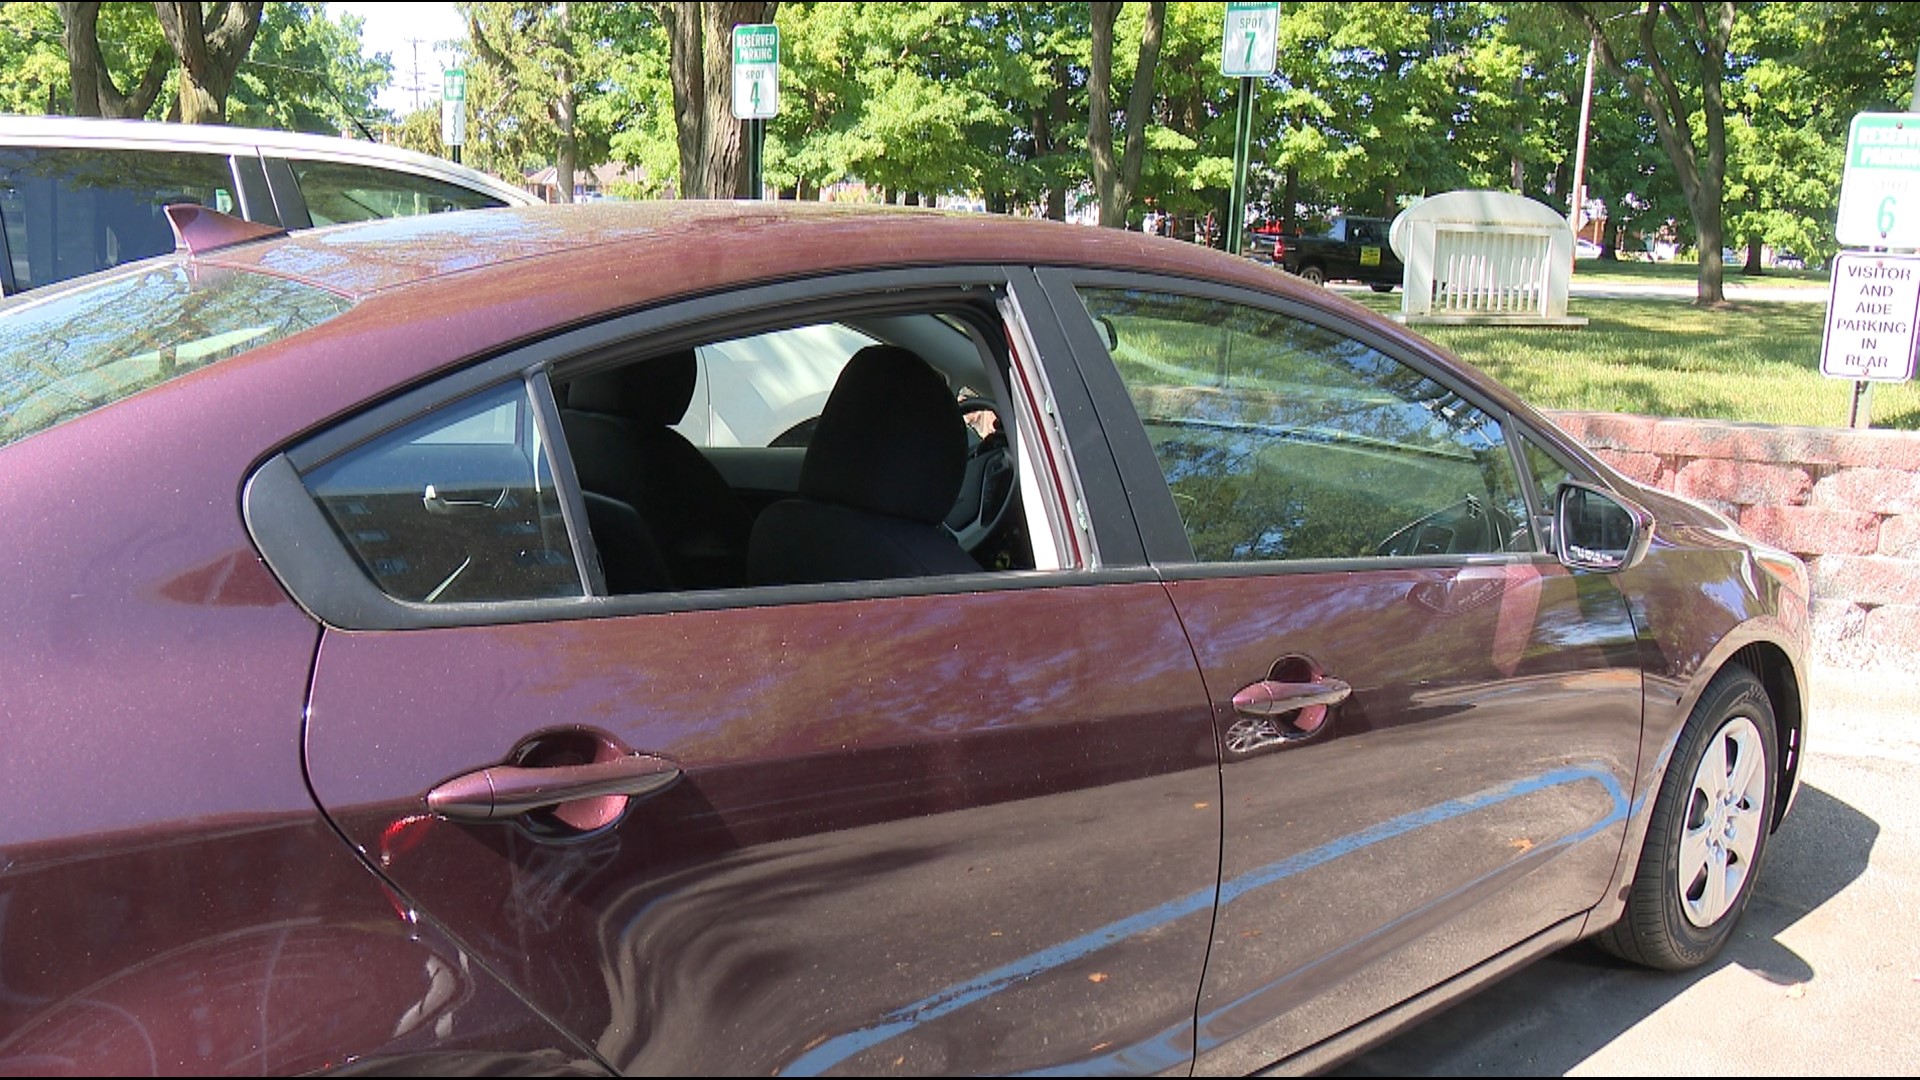 The rash of recent Kia and Hyundai thefts on the west side gained several new victims Thursday.